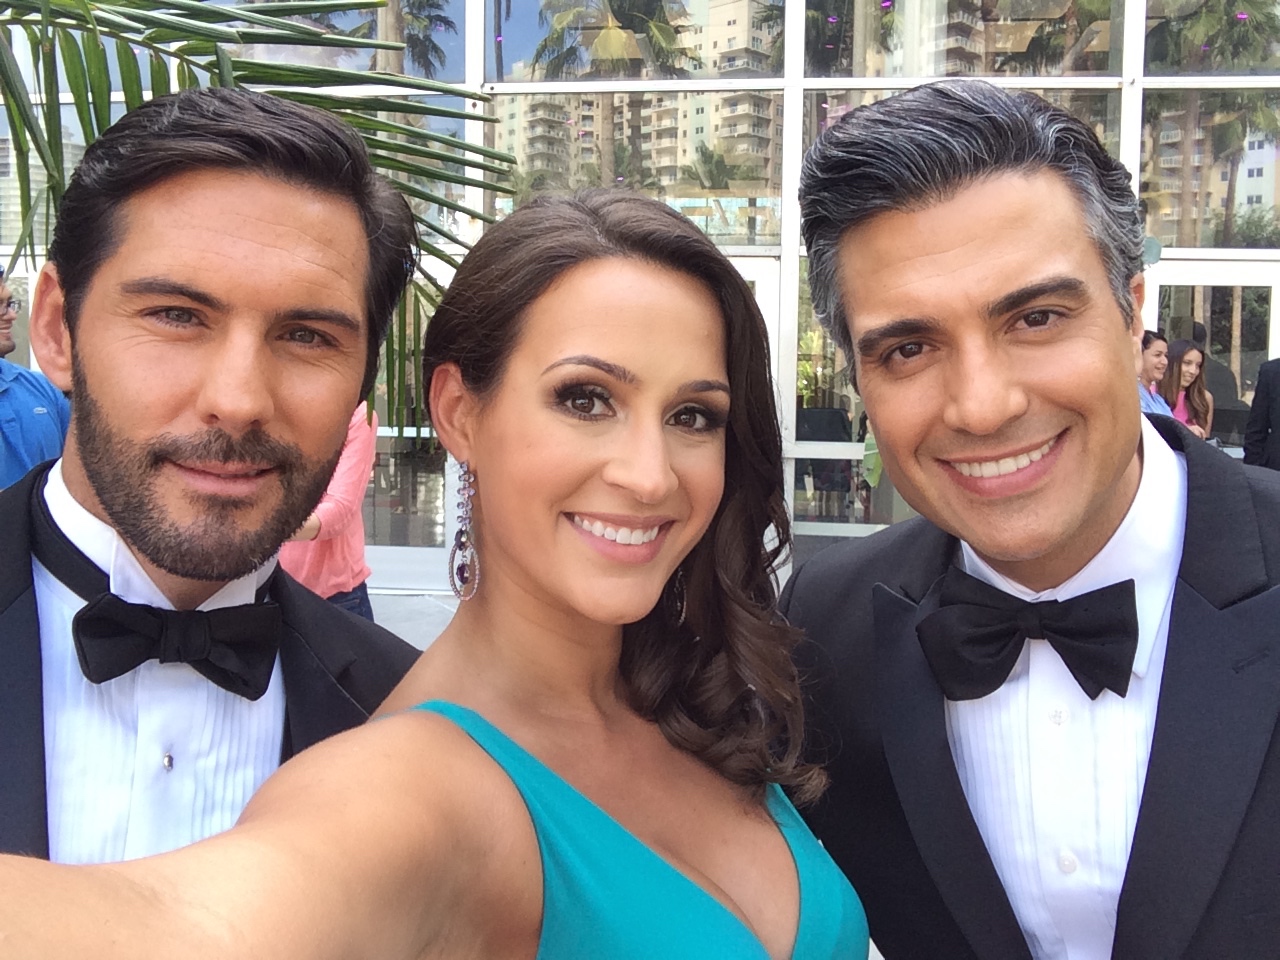 On set at Jane The Virgin with co-stars Jaime Camil and Keller Wortham